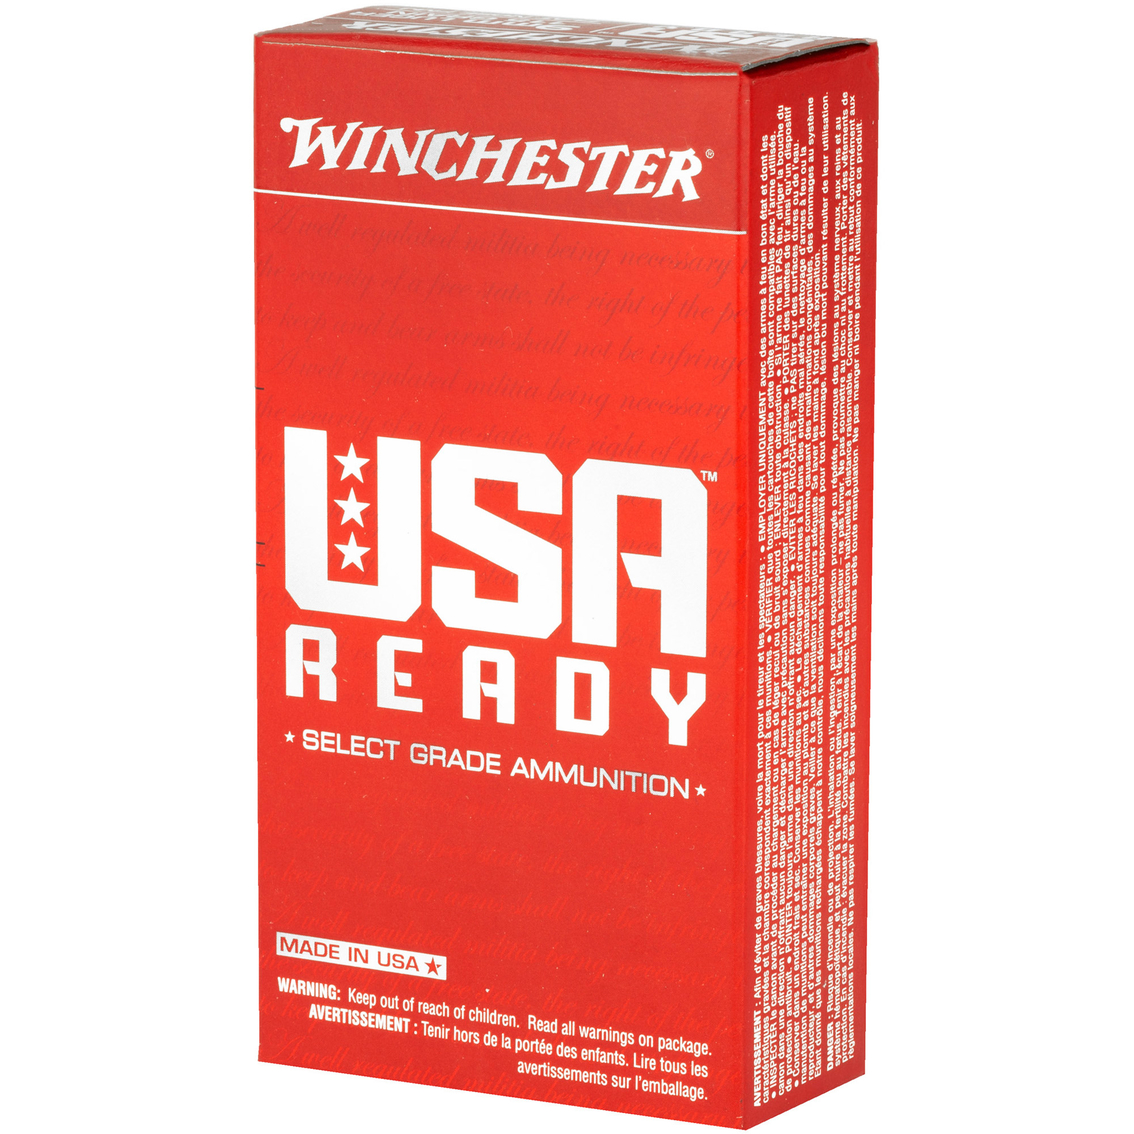 Winchester USA Ready 9mm 115 Gr. FMJ 50 Rounds - Image 3 of 4